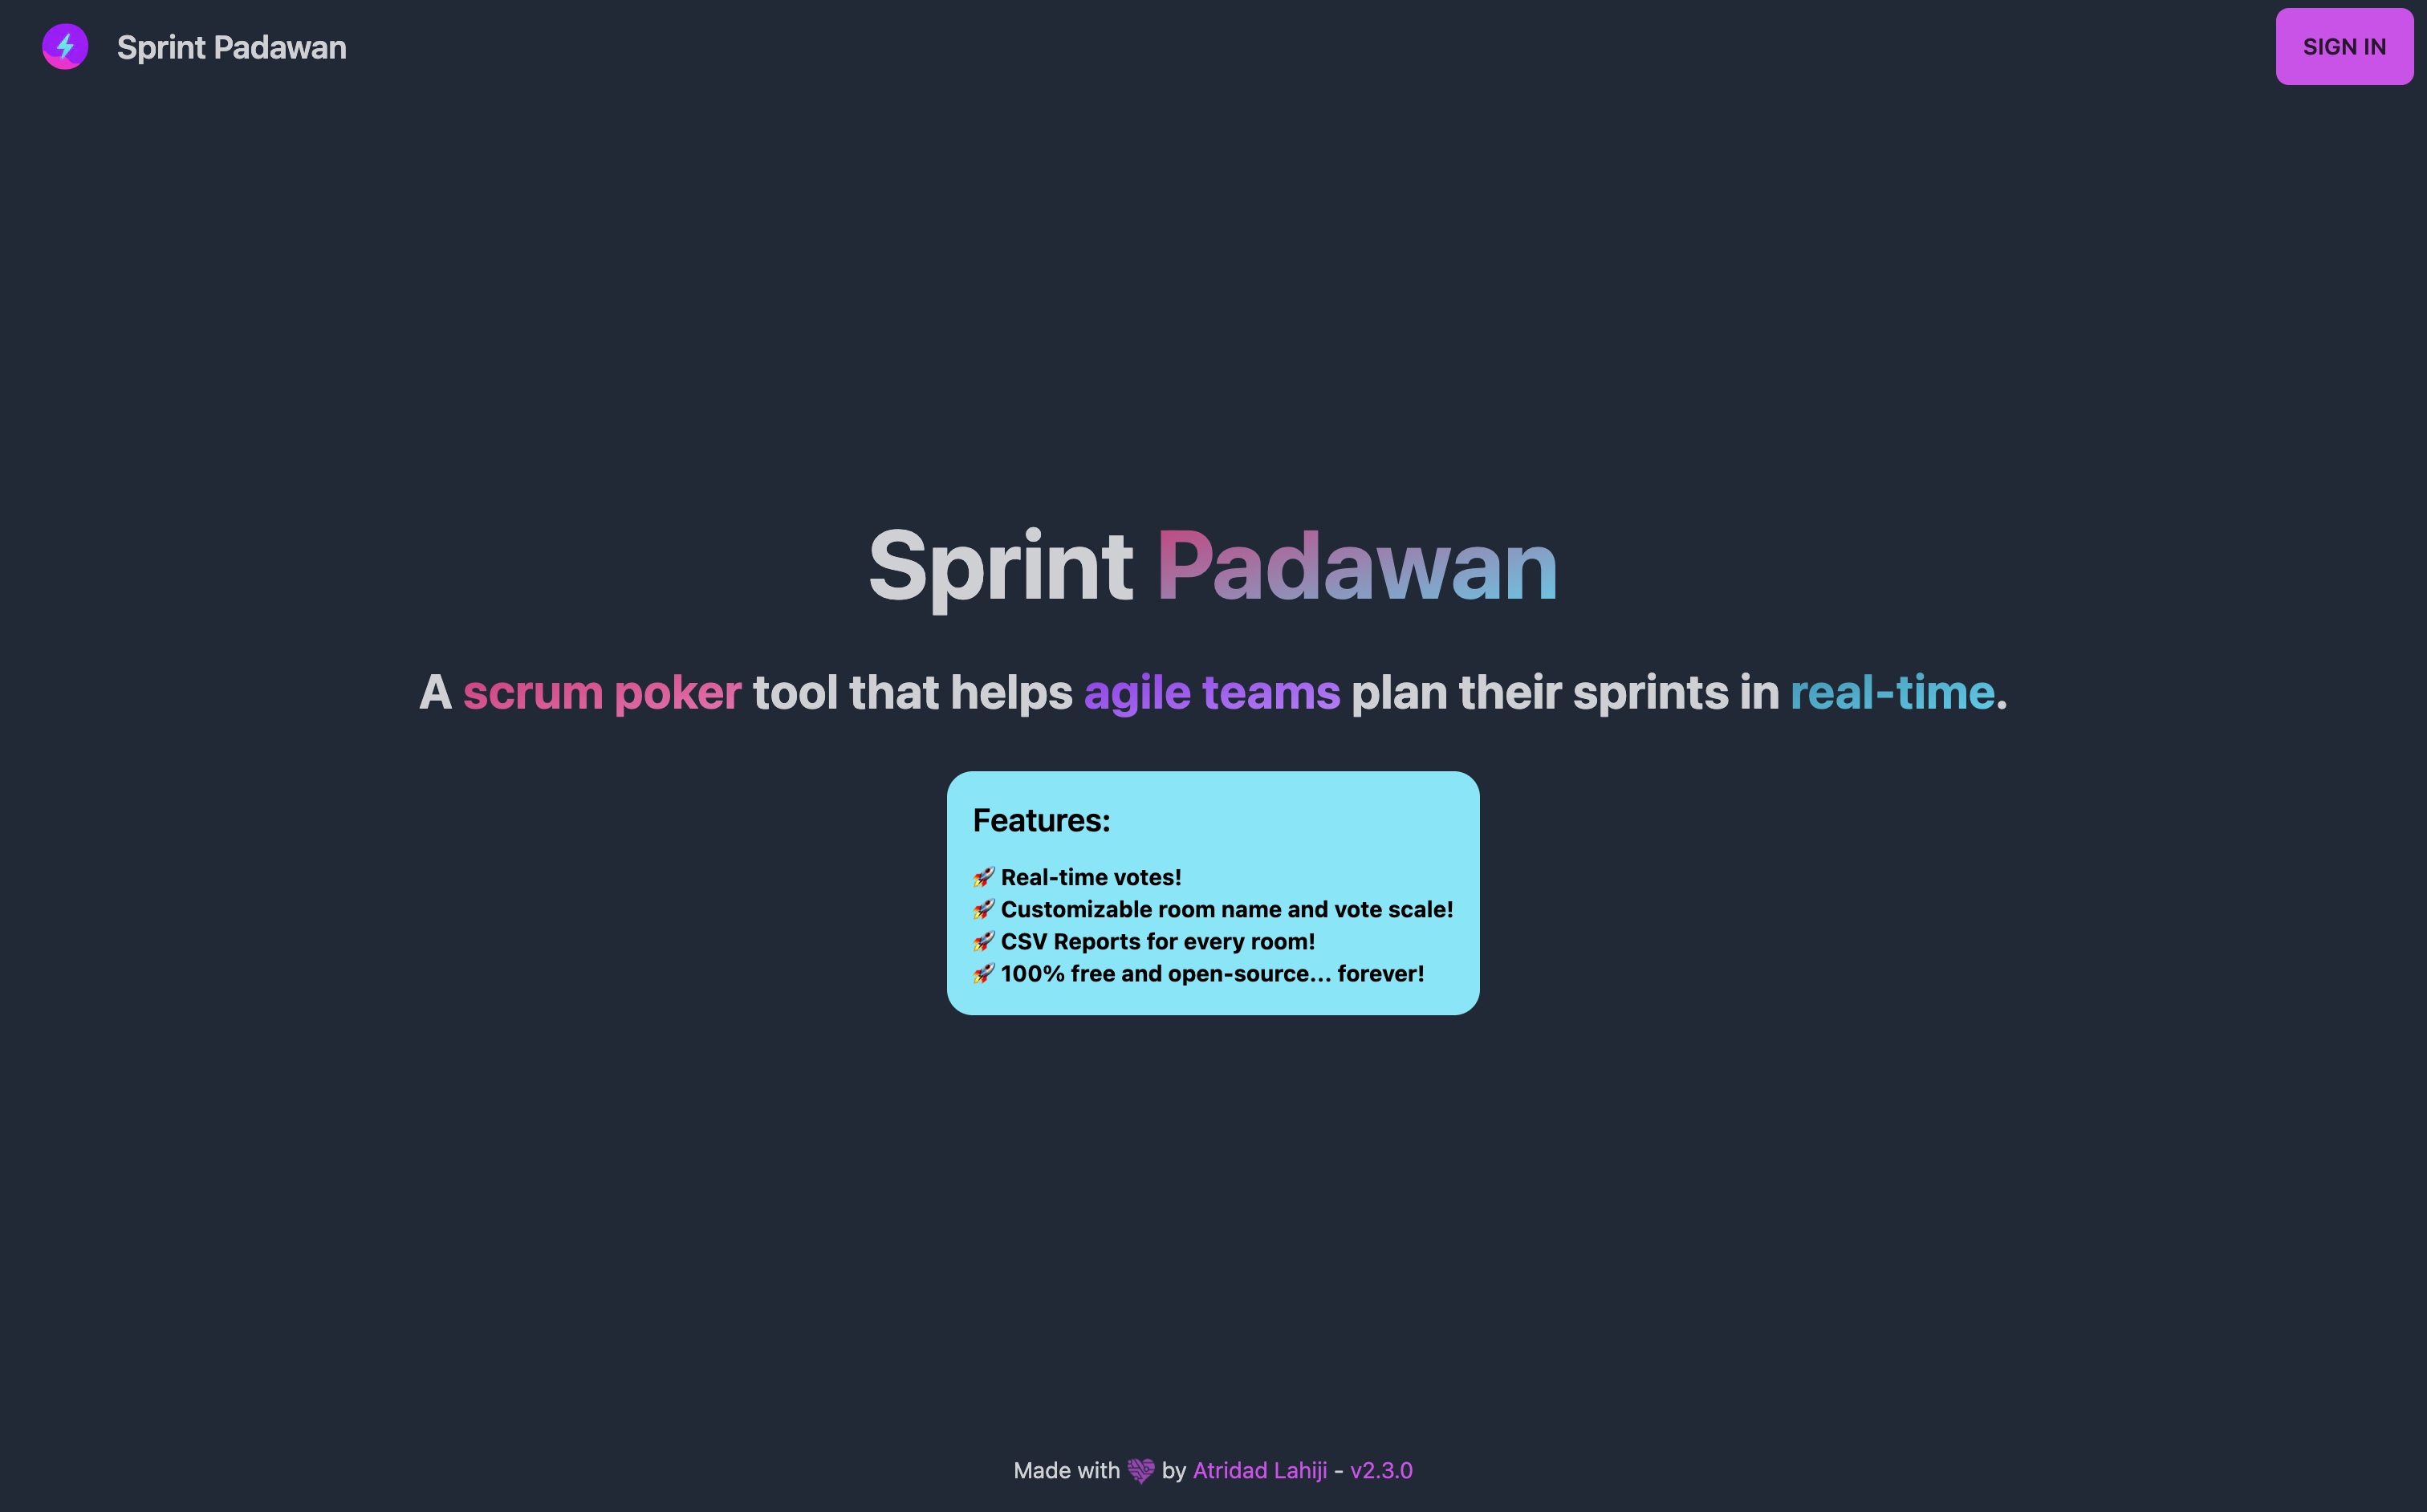 A scrum poker tool that helps agile teams plan their sprints in real-time.